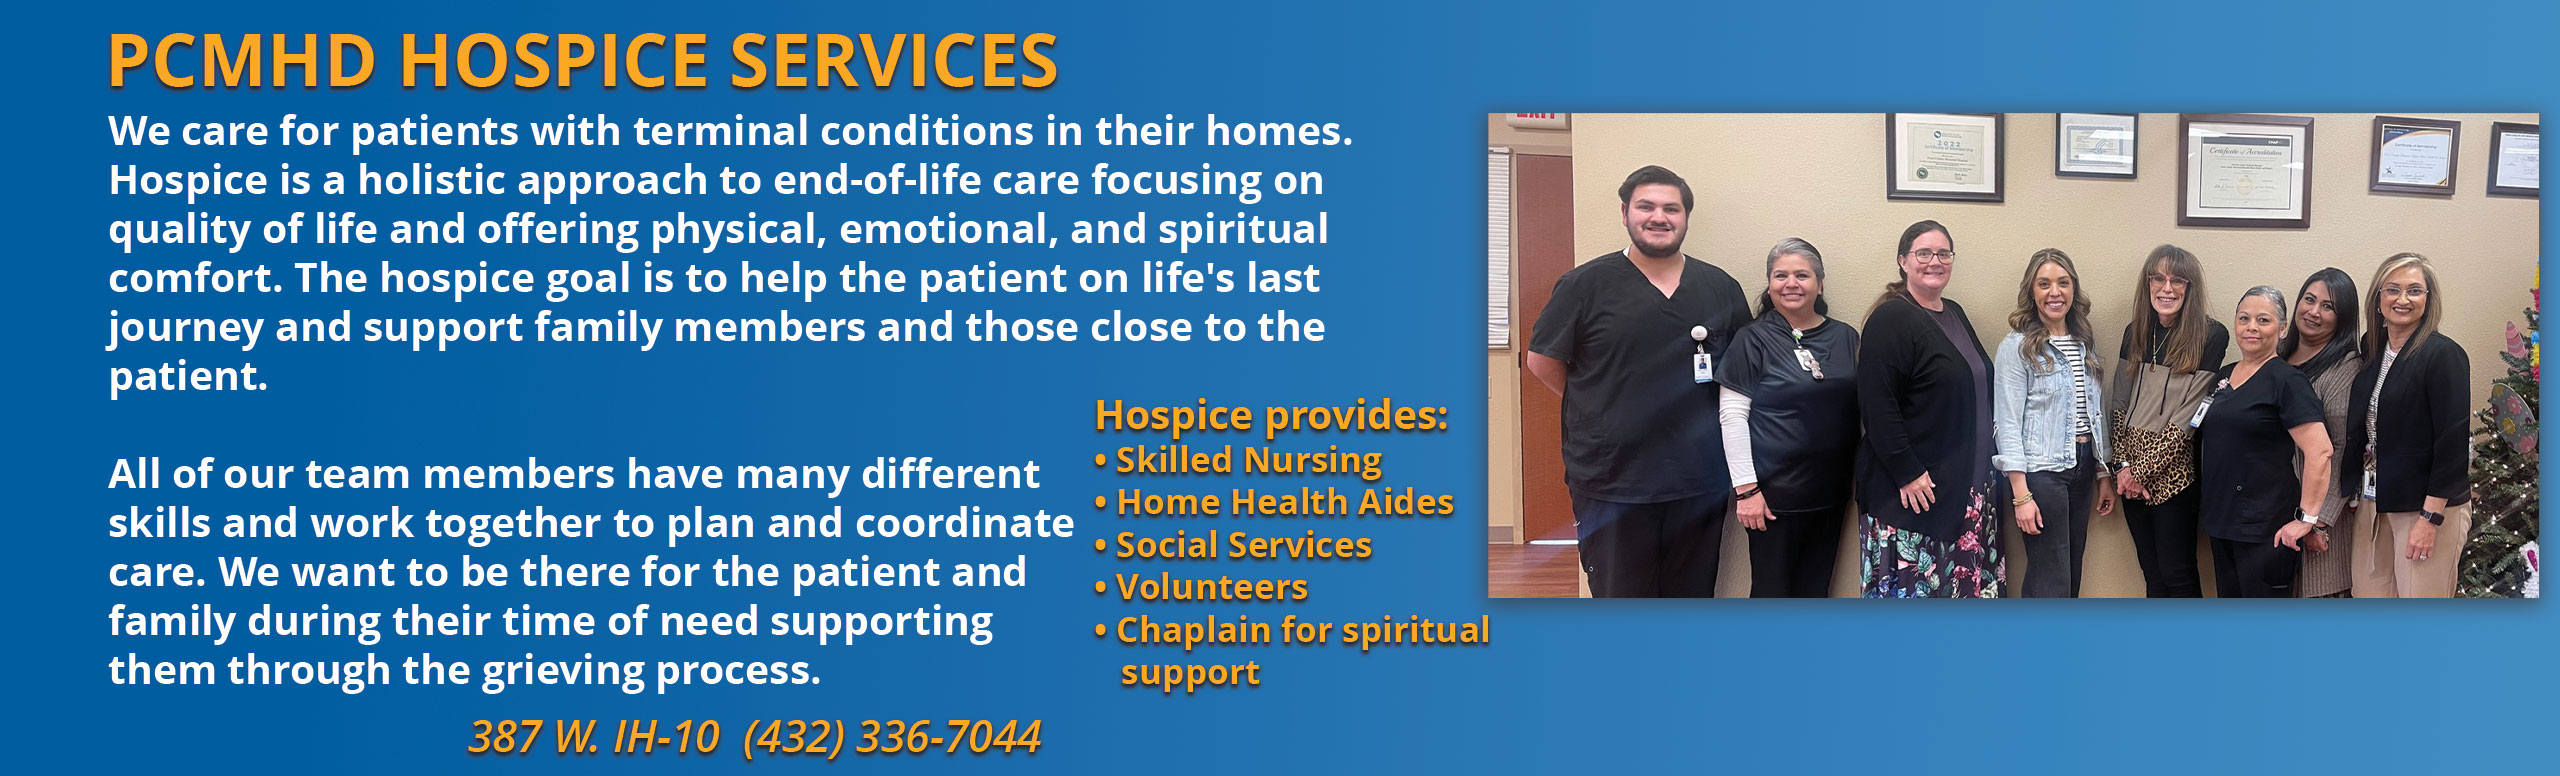 PCMH Hospice Services
We care for patients with terminal conditions in their homes. Hospice os a holistic approach to end-of-life care focusing on quality of life and offering physical, emotional, and spiritual comfort. The Hospice goal is to help the patient on life's last journey and support family members and those close to the patient.

All of our team members have many different skills and work together to plan and coordinate care/ We want to be there for the patient and family during their time of need supporting them through the grieving process.


Hospice Provides:

-Skilled Nursing
- Home Health Aides
-Social Services
-Volunteers
-Chaplain for spiritual support

387 W. IH-10 (432)336-7044